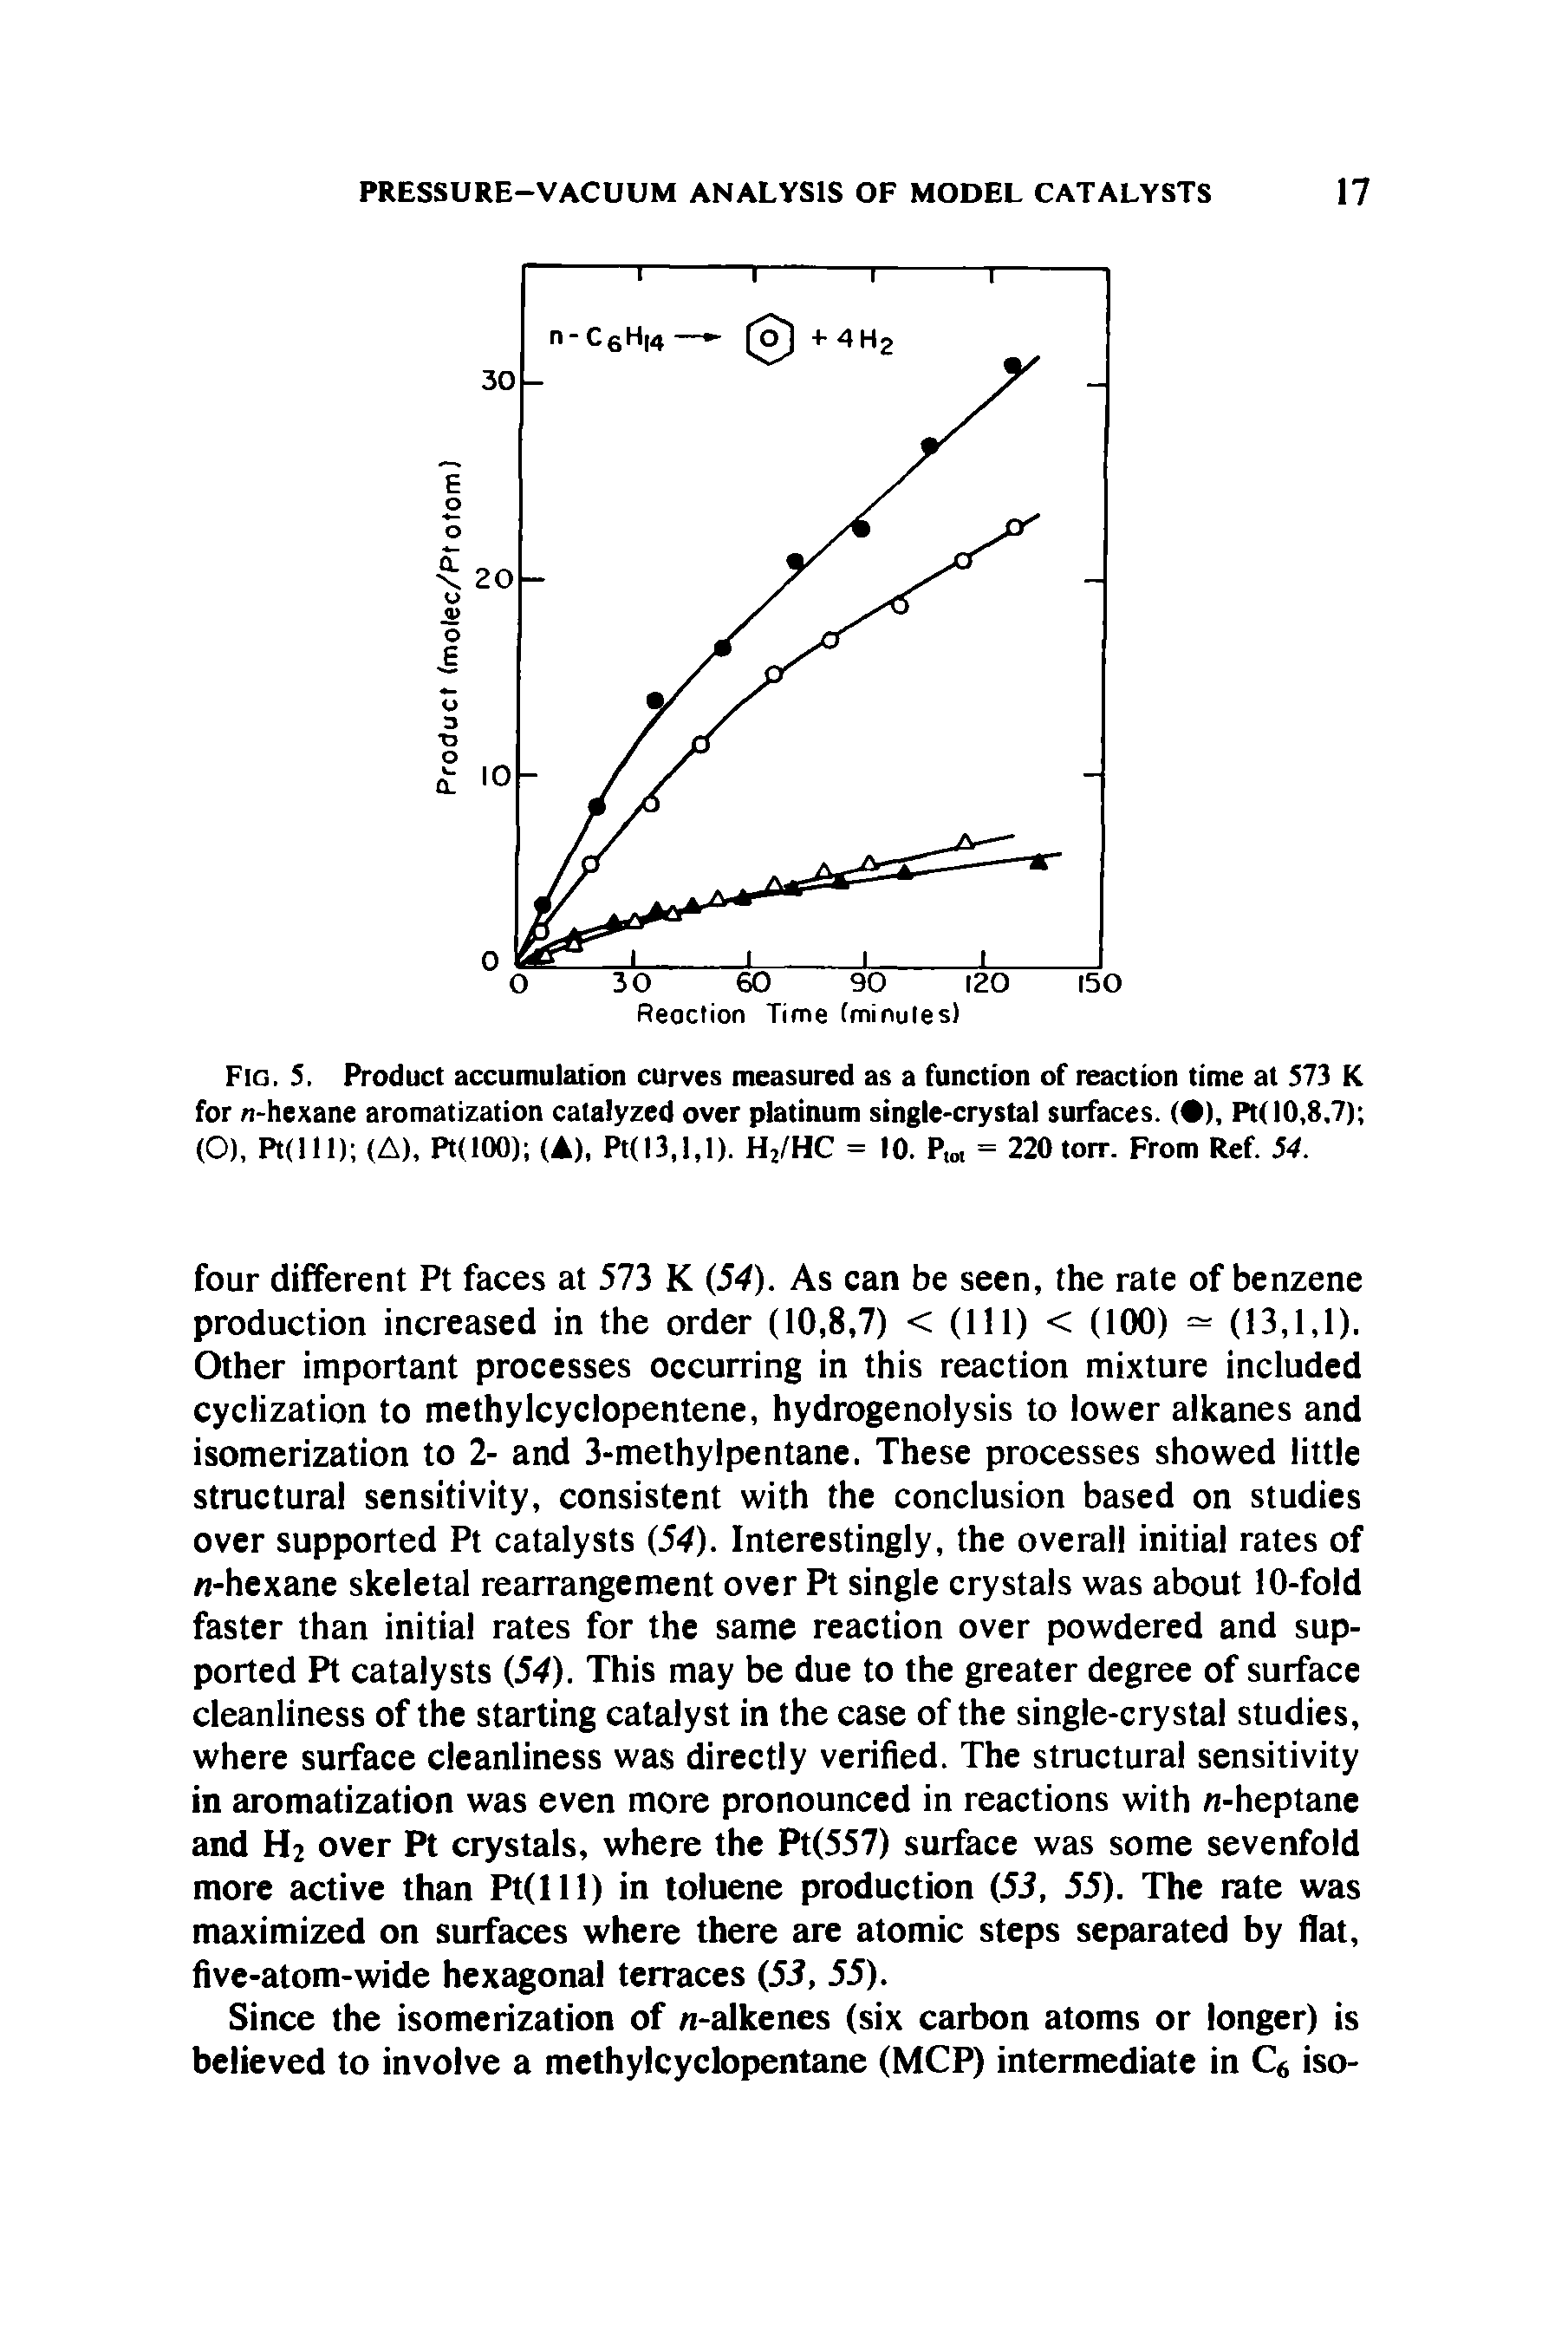 Fig. 5. Product accumulation curves measured as a function of reaction time at 573 K for n-hexane aromatization catalyzed over platinum single-crystal surfaces. ( ), Pt( 10,8,7) (O), Pt(lll) (A), Pt(100) (A), Pt(l3,l,l). H2/HC = 10. P1M = 220 torr. From Ref. 54.